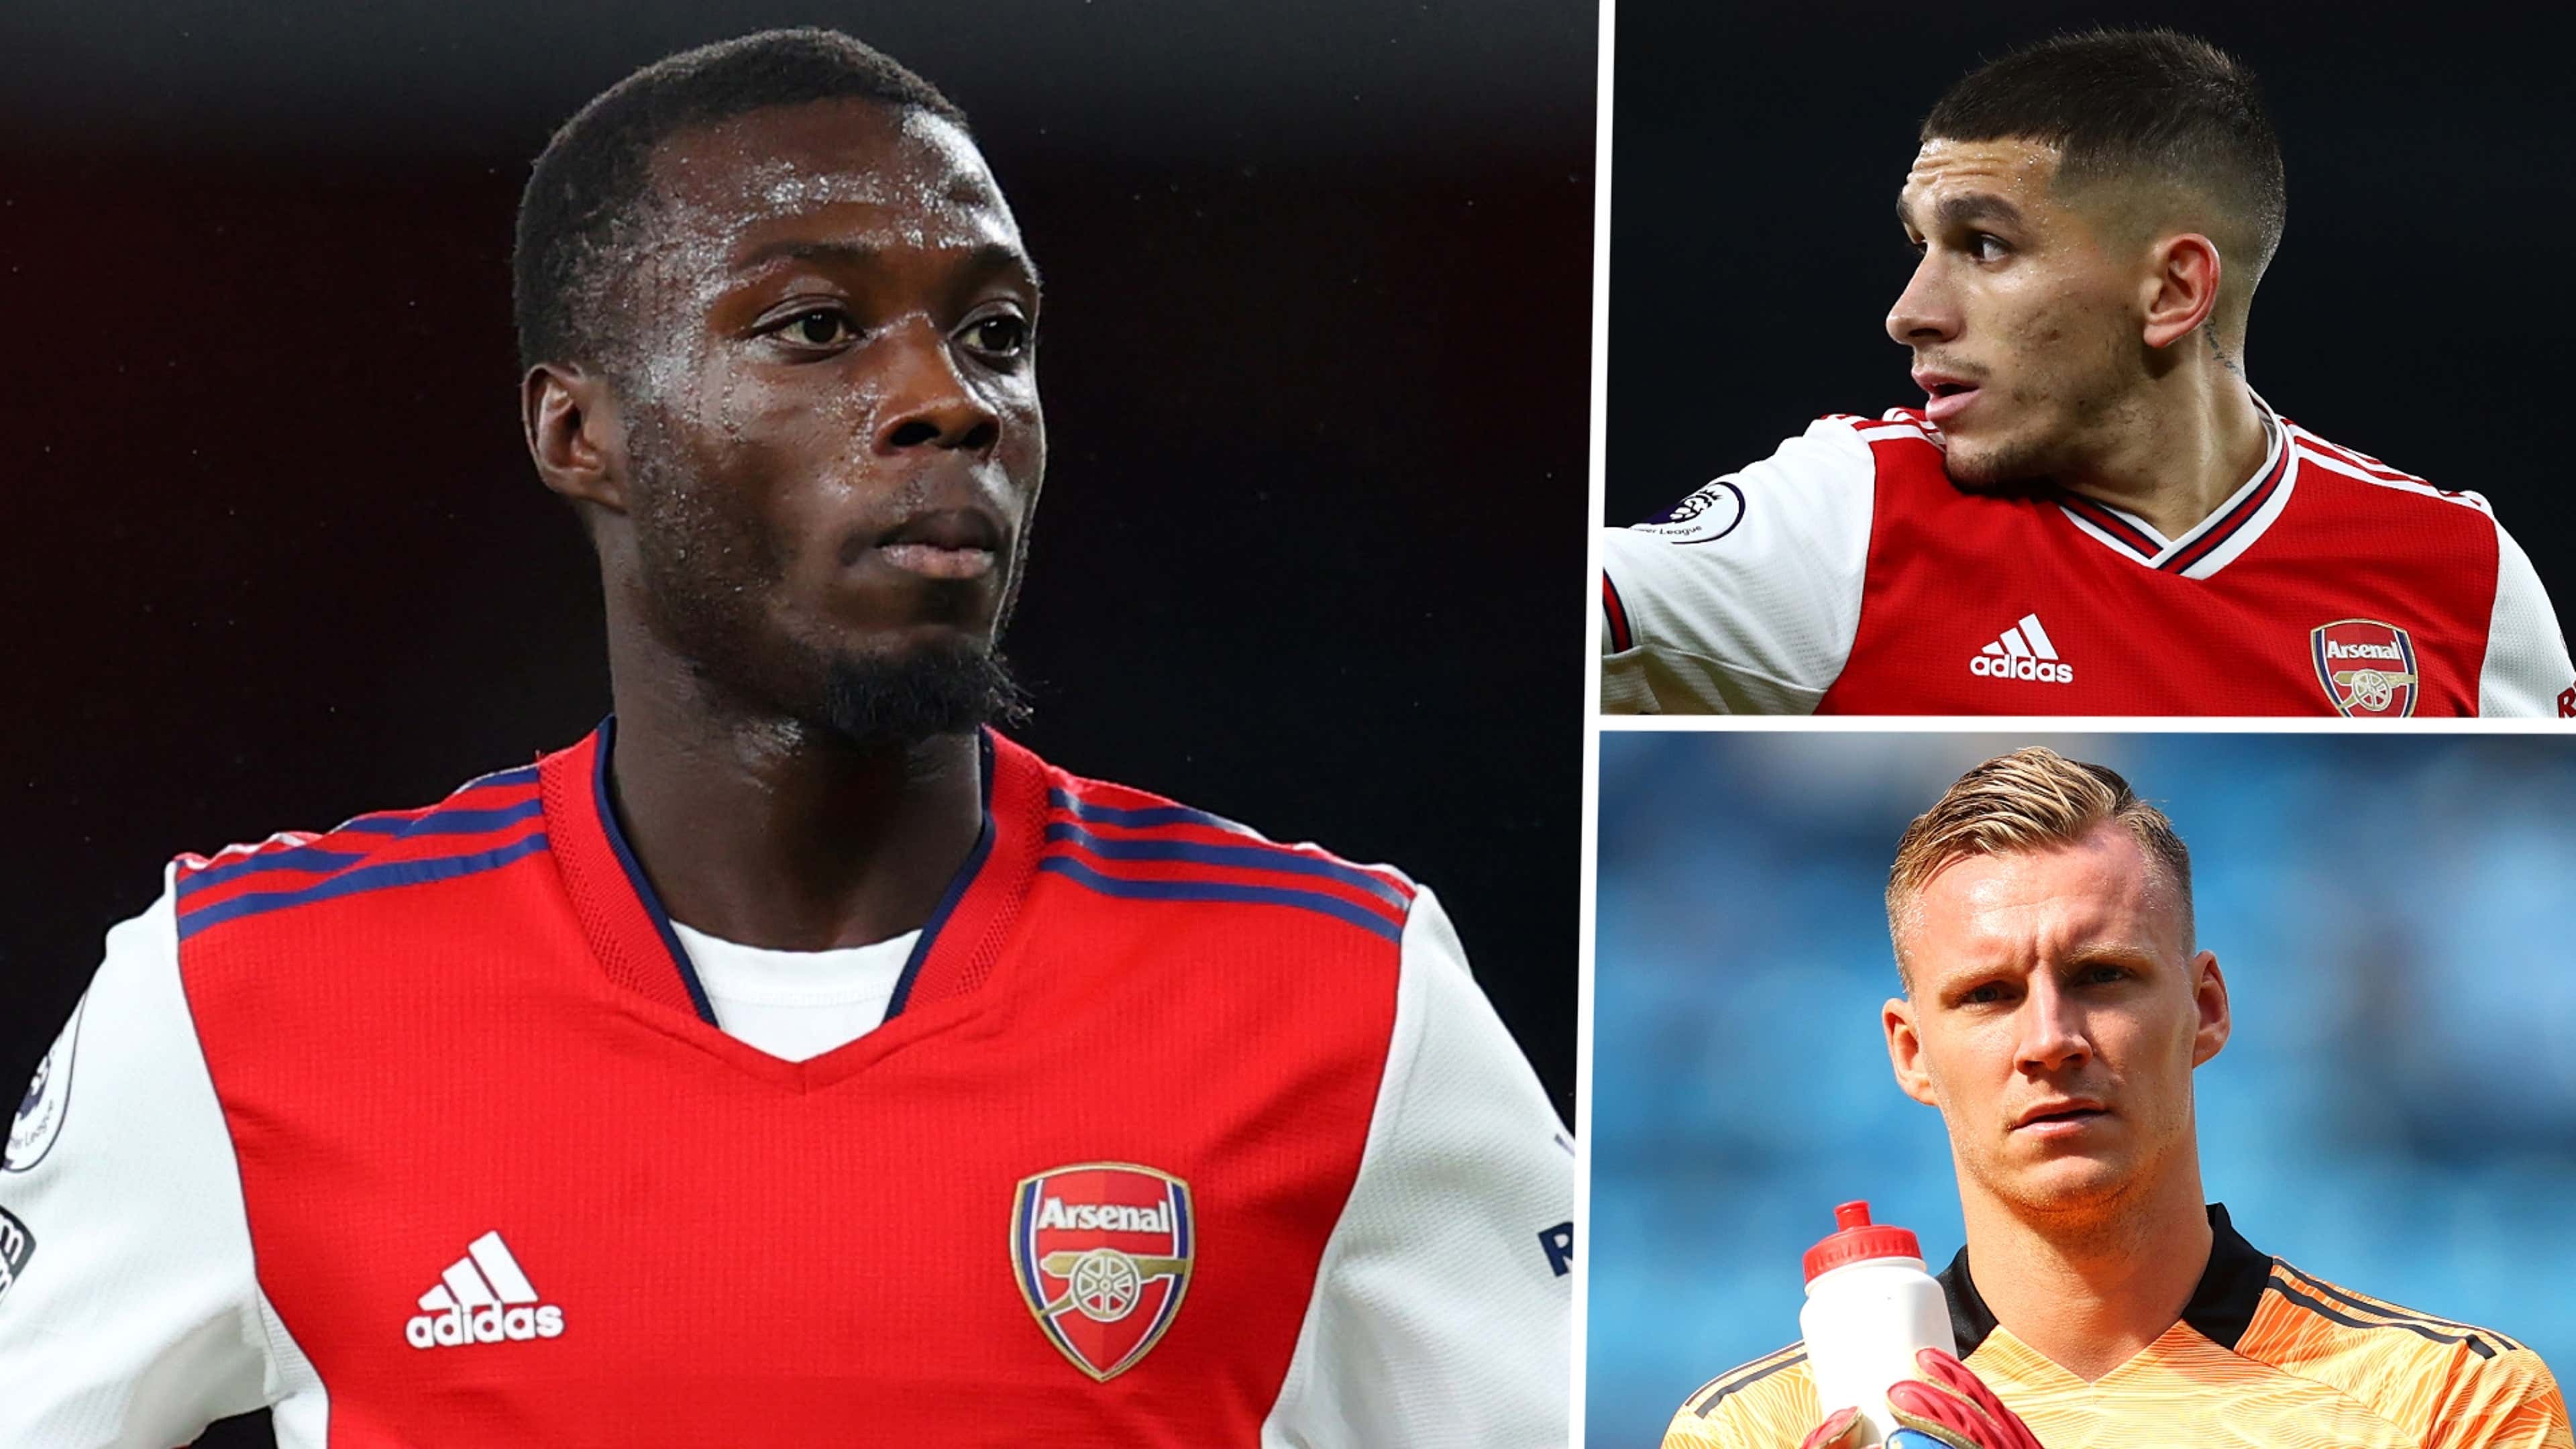 Analysis of the full Arsenal squad - Keep, Sell or Loan? - Just